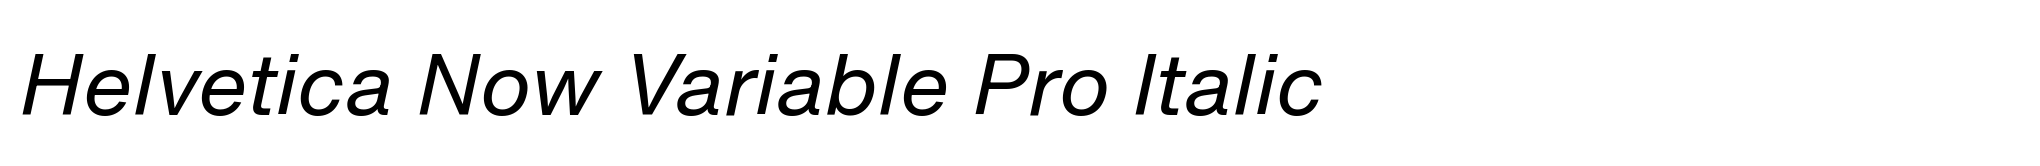 Helvetica Now Variable Pro Italic image